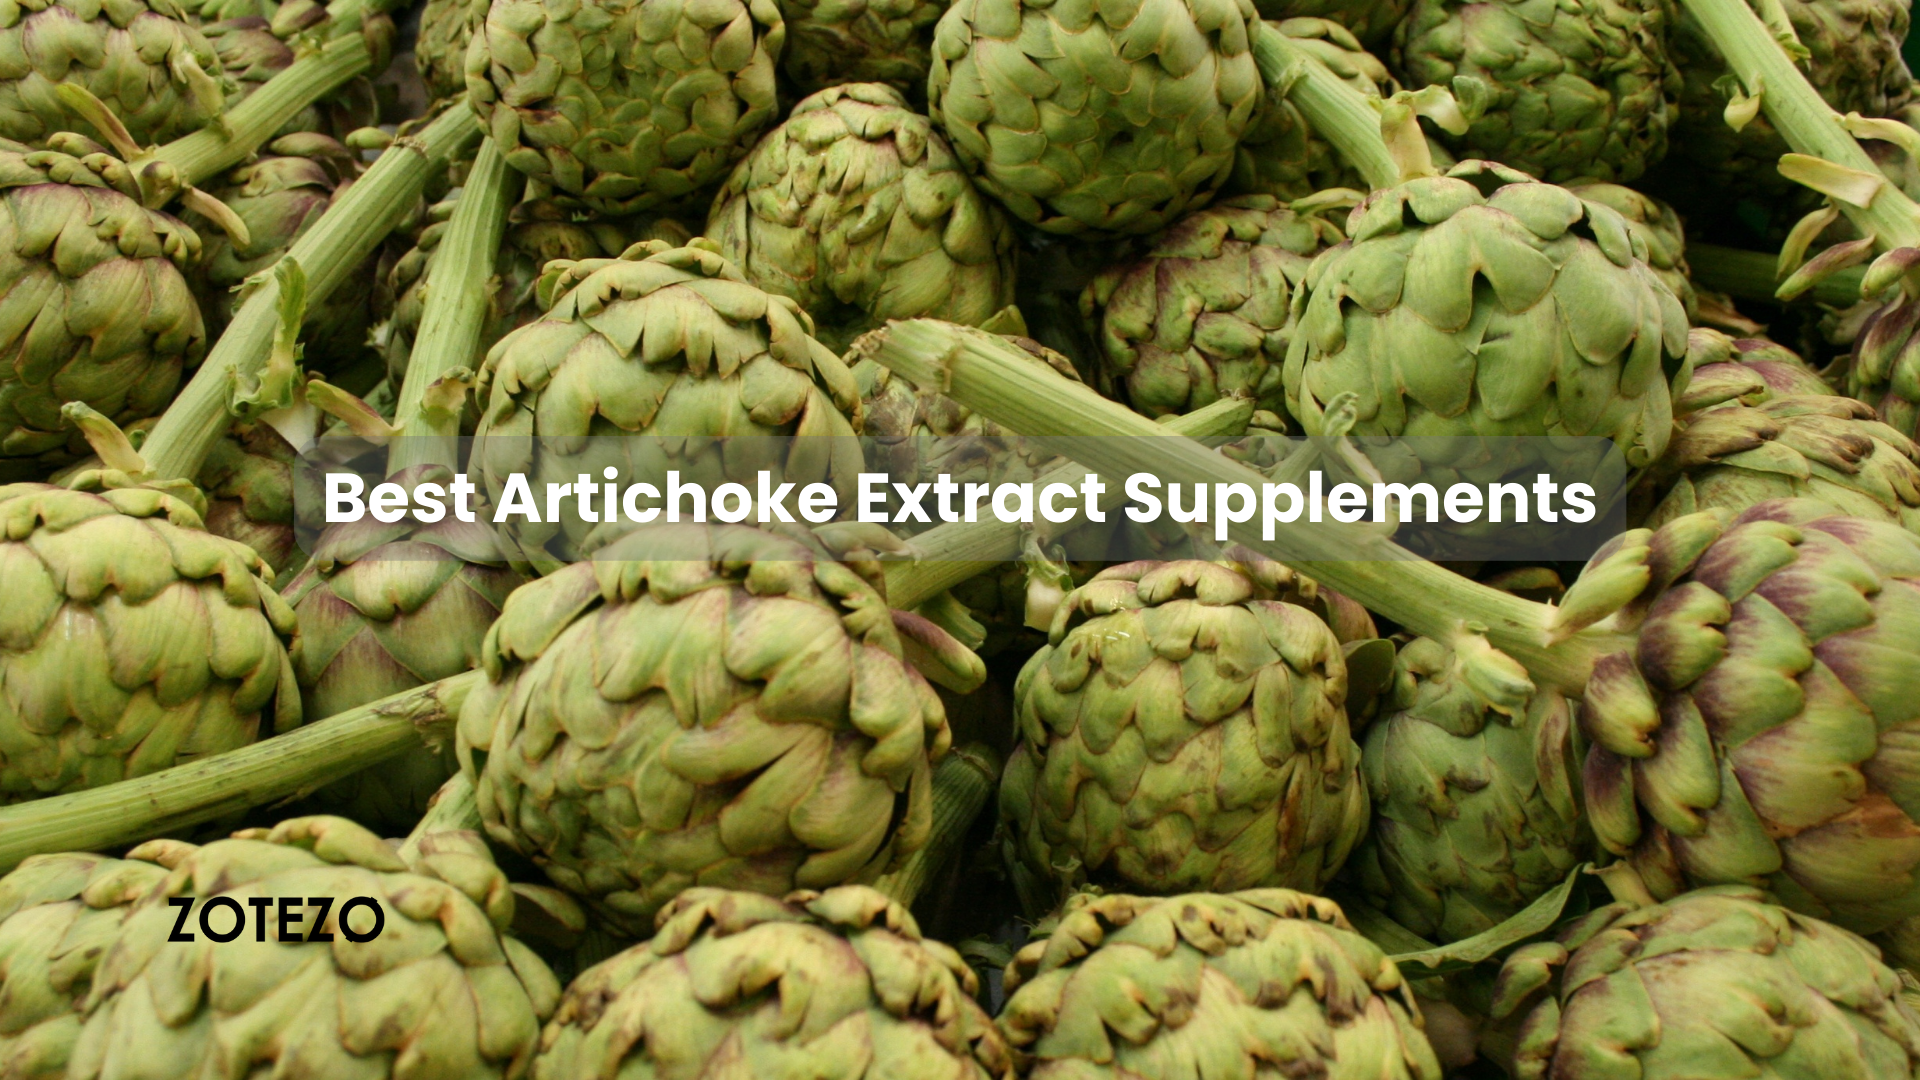 Artichoke Extract Supplements in USA